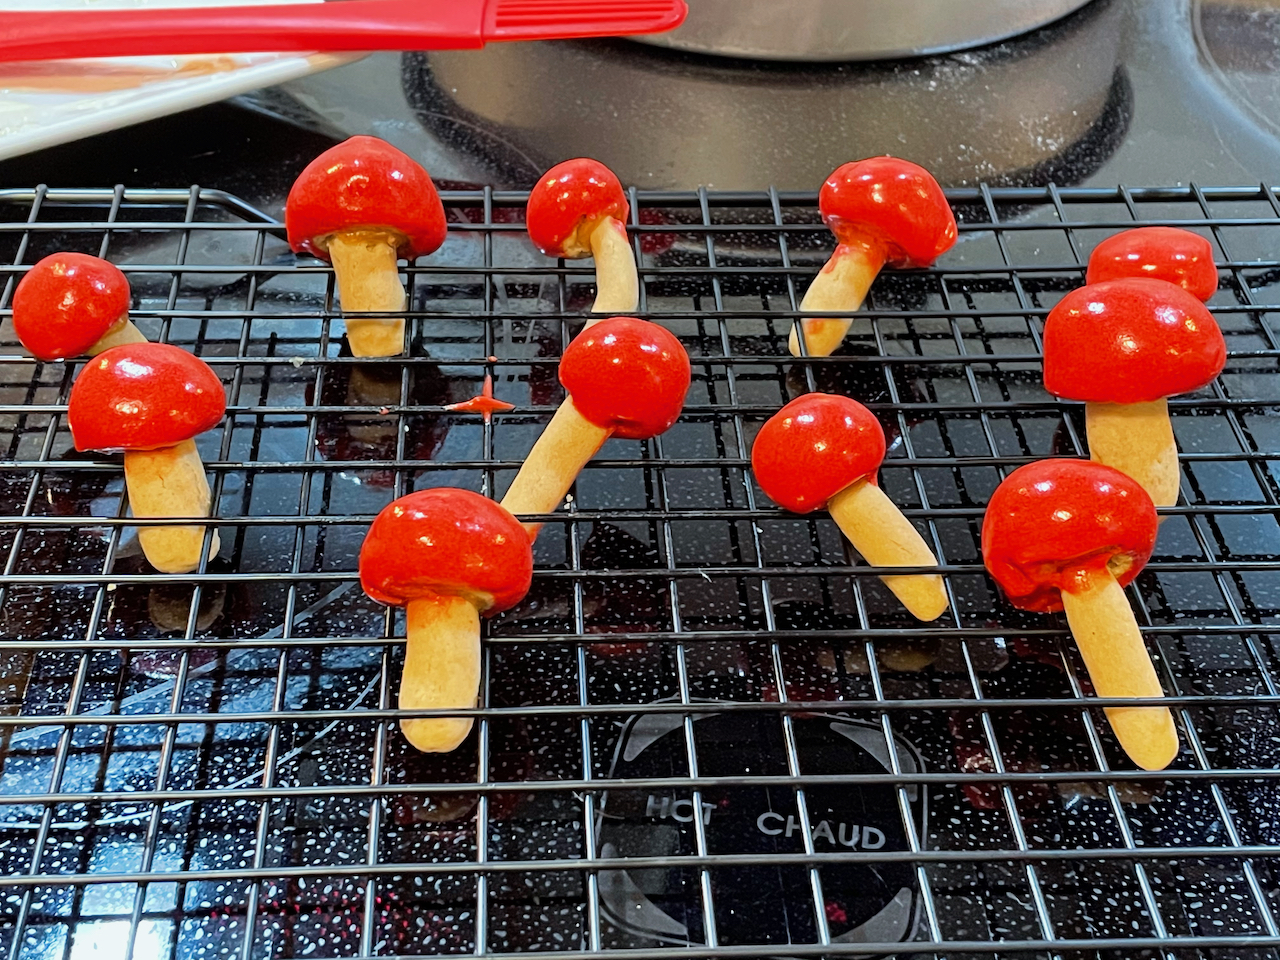 Small cookies in the shape of mushrooms with red caps are set on a cooling rack.